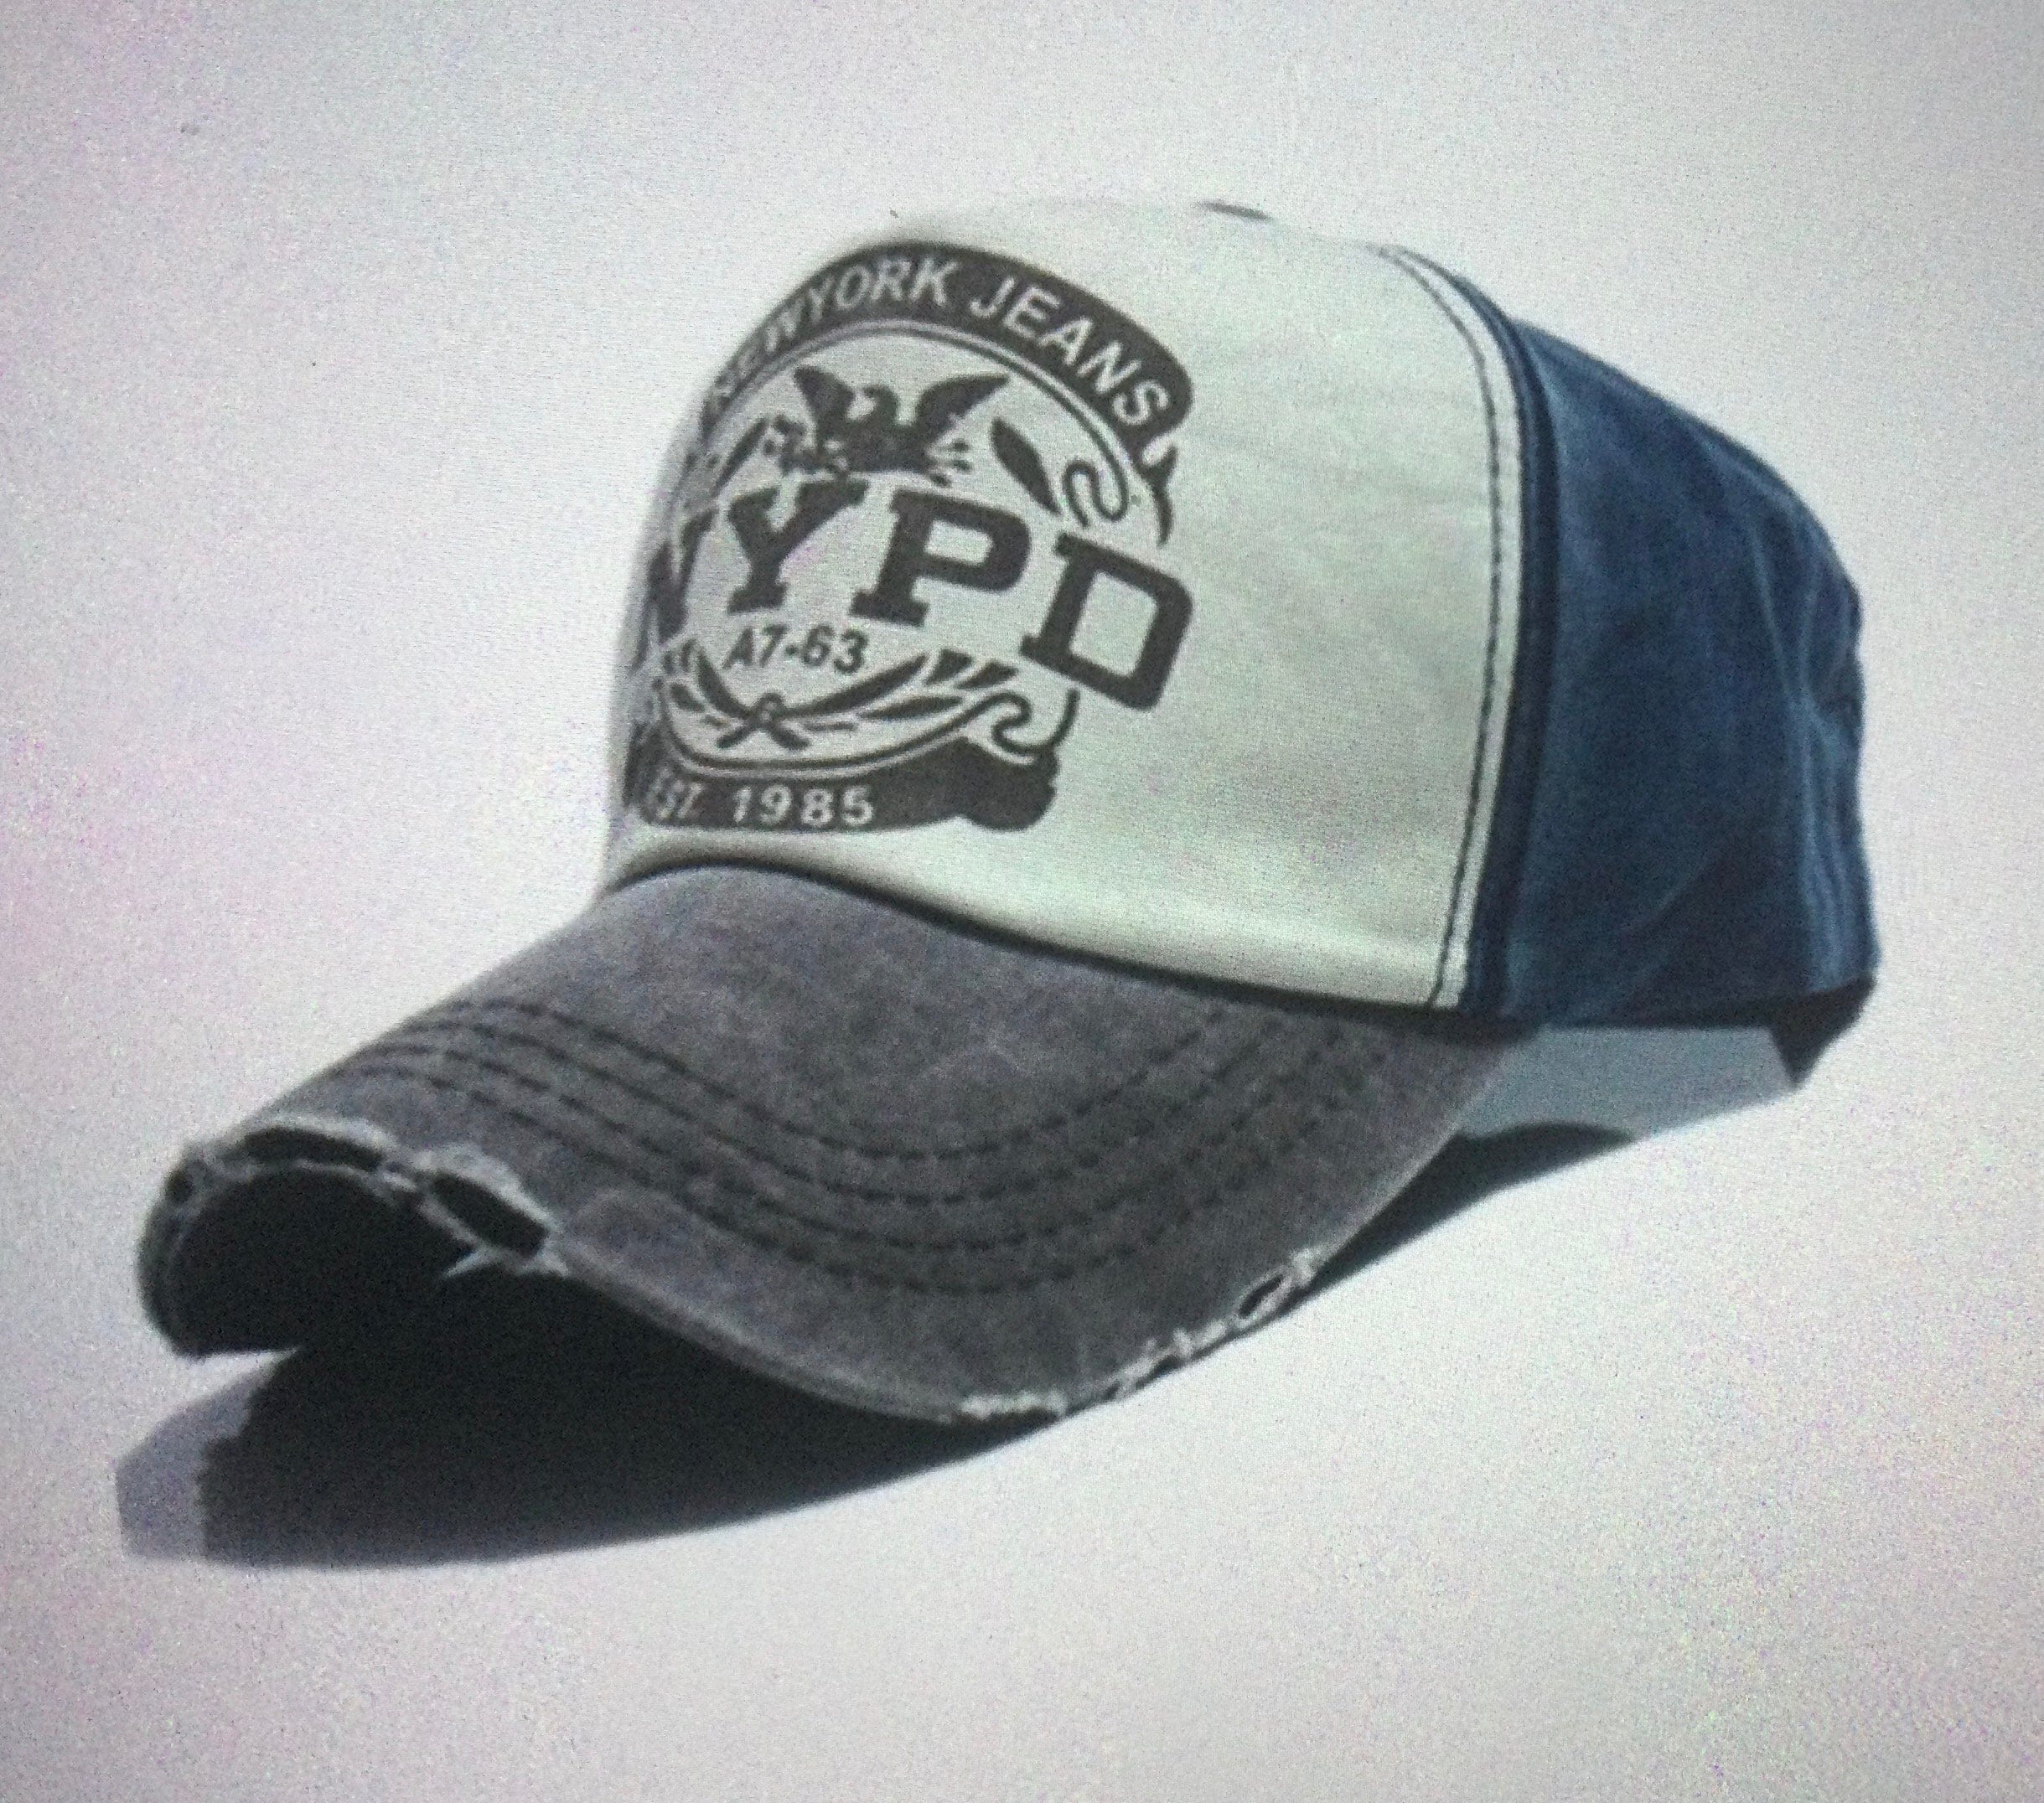 NYPD Casual cap